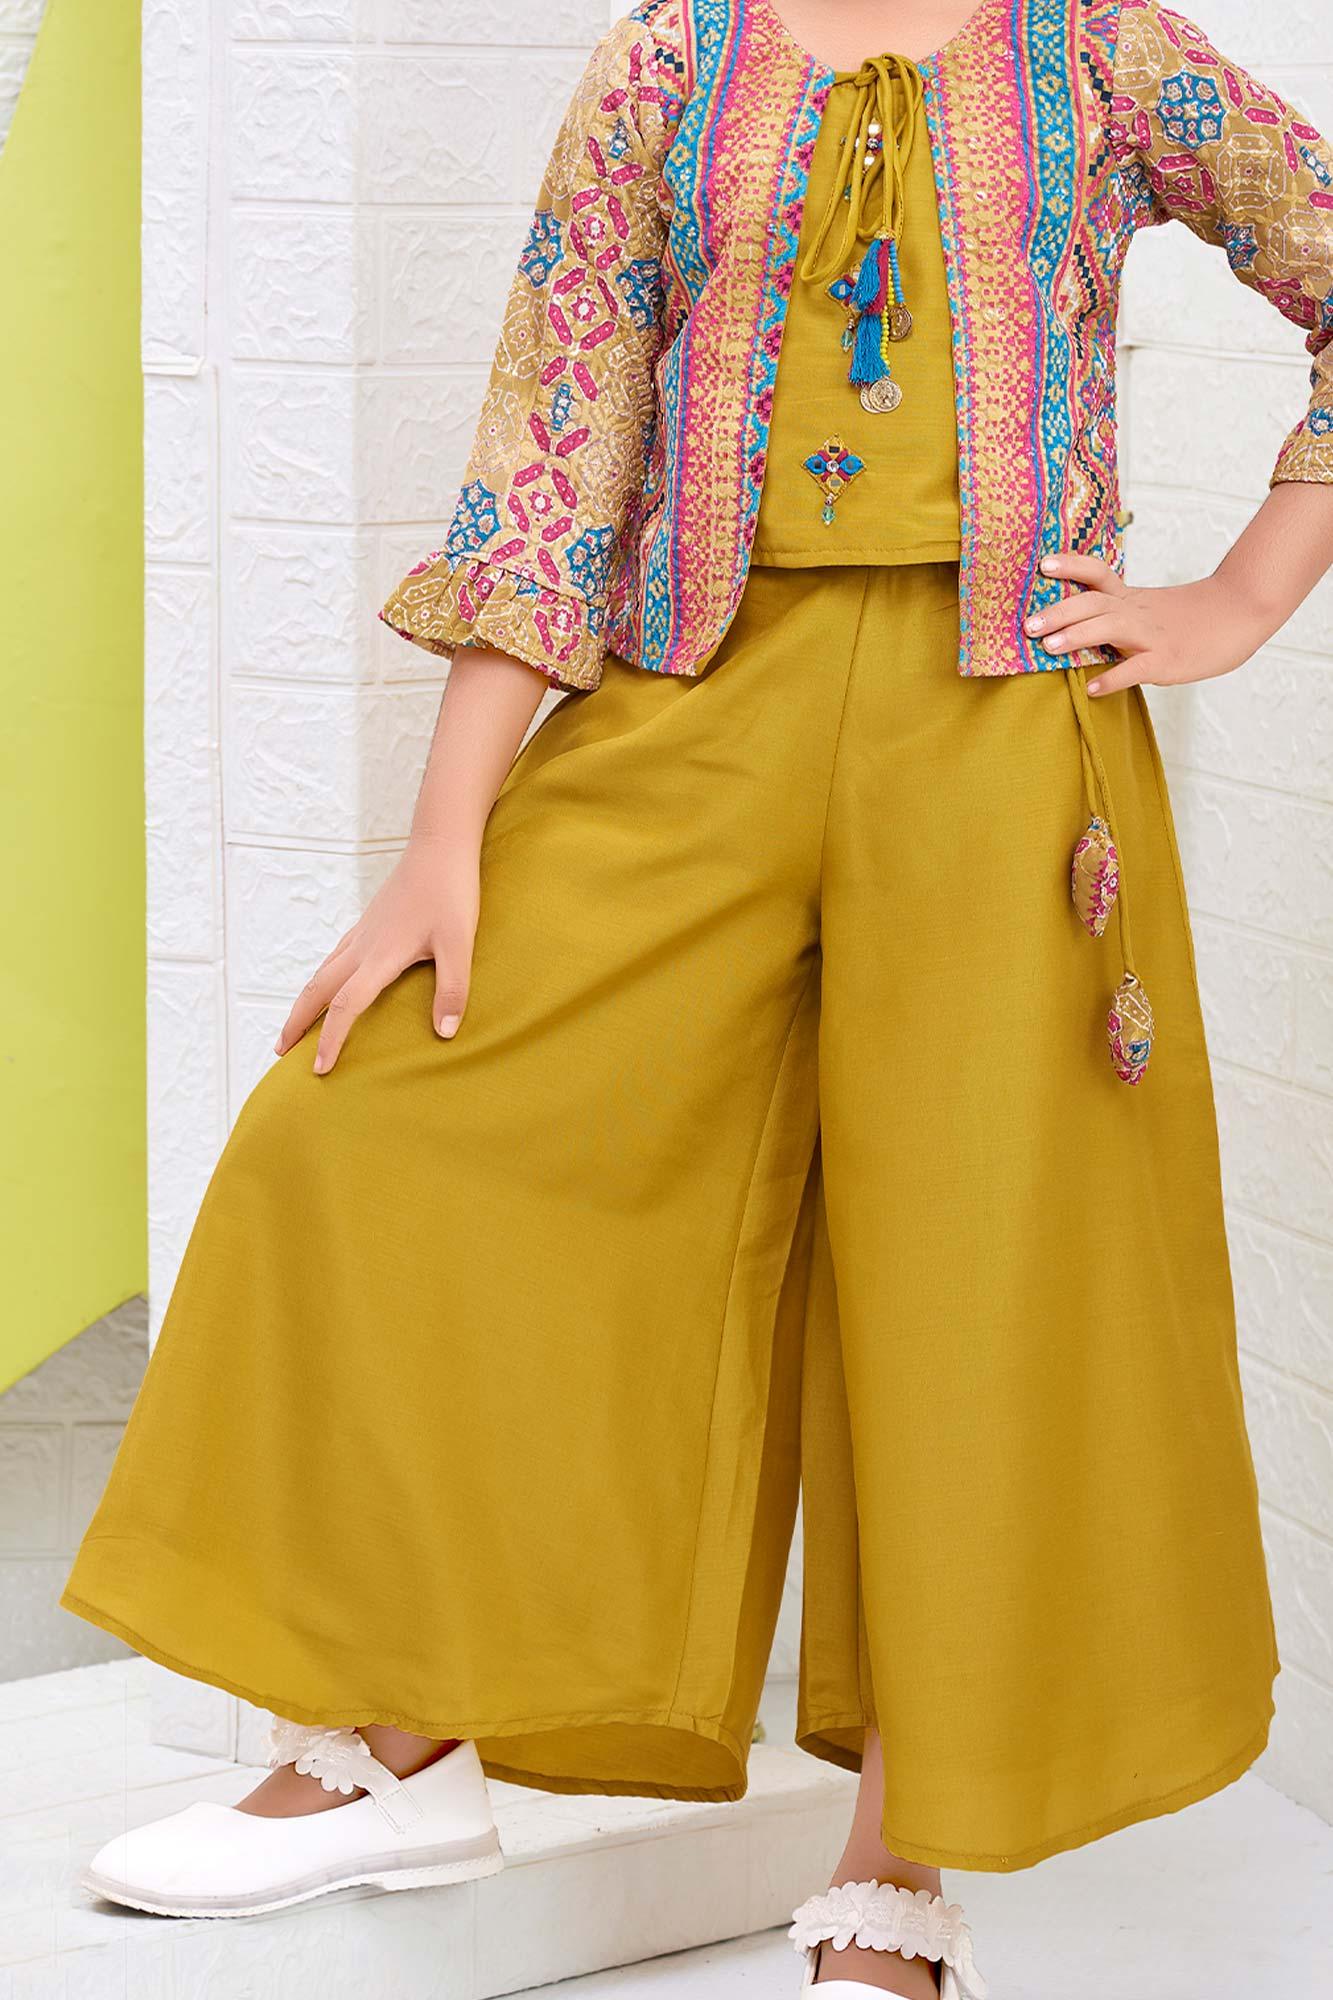 Palazzo Pants – Tailored West Fashion Boutique